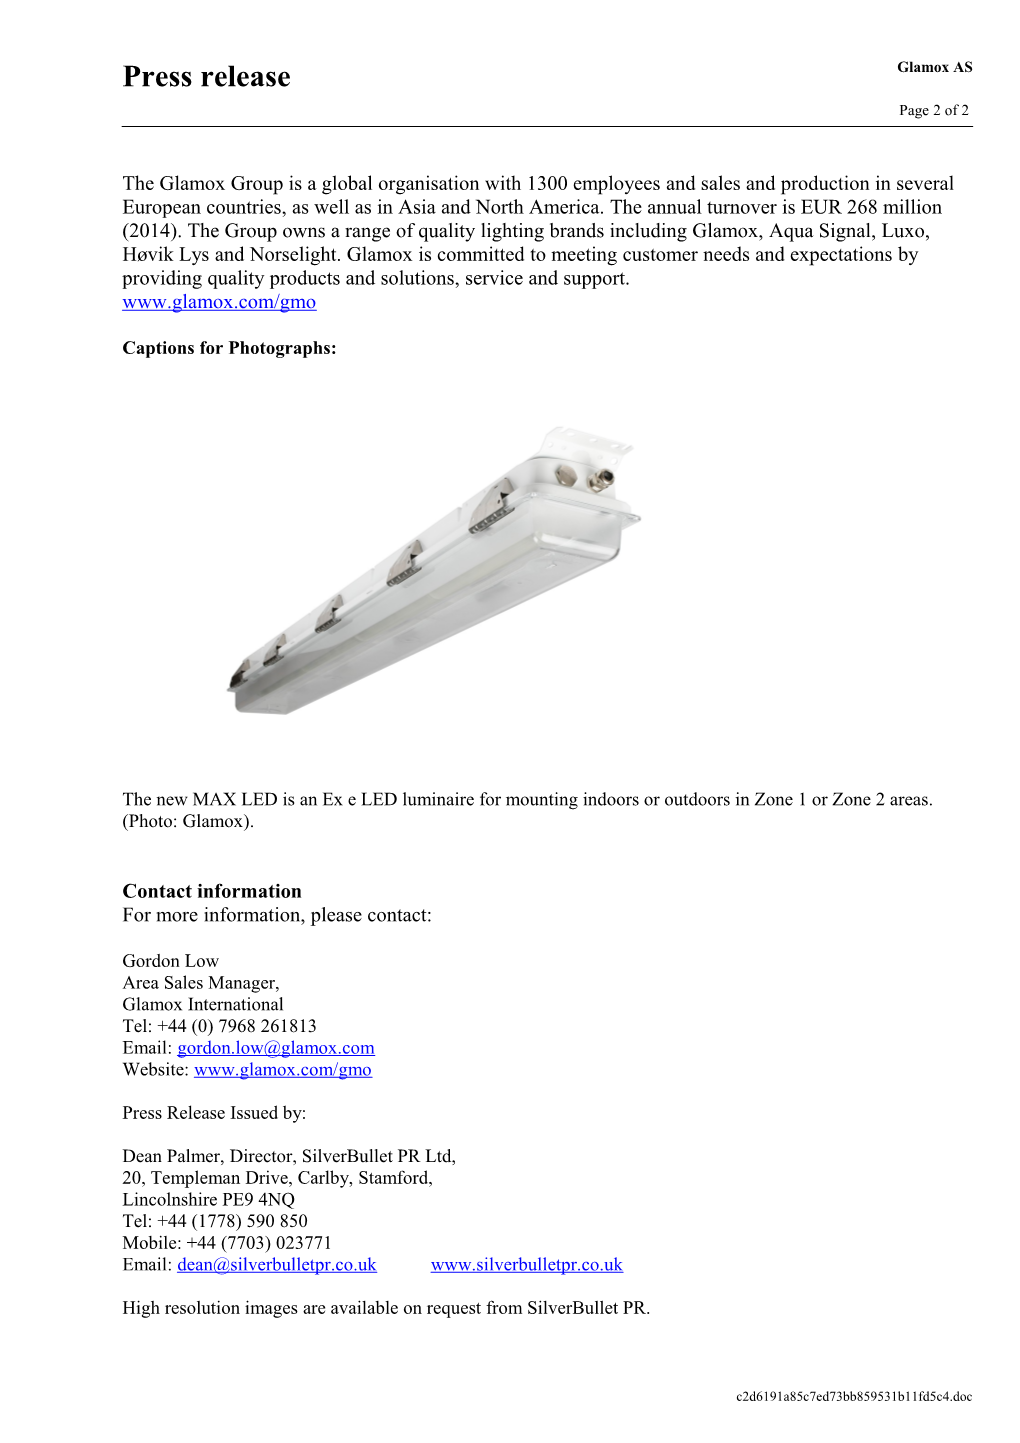 Glamox Launches LED Replacement for Popular MAX Luminaire